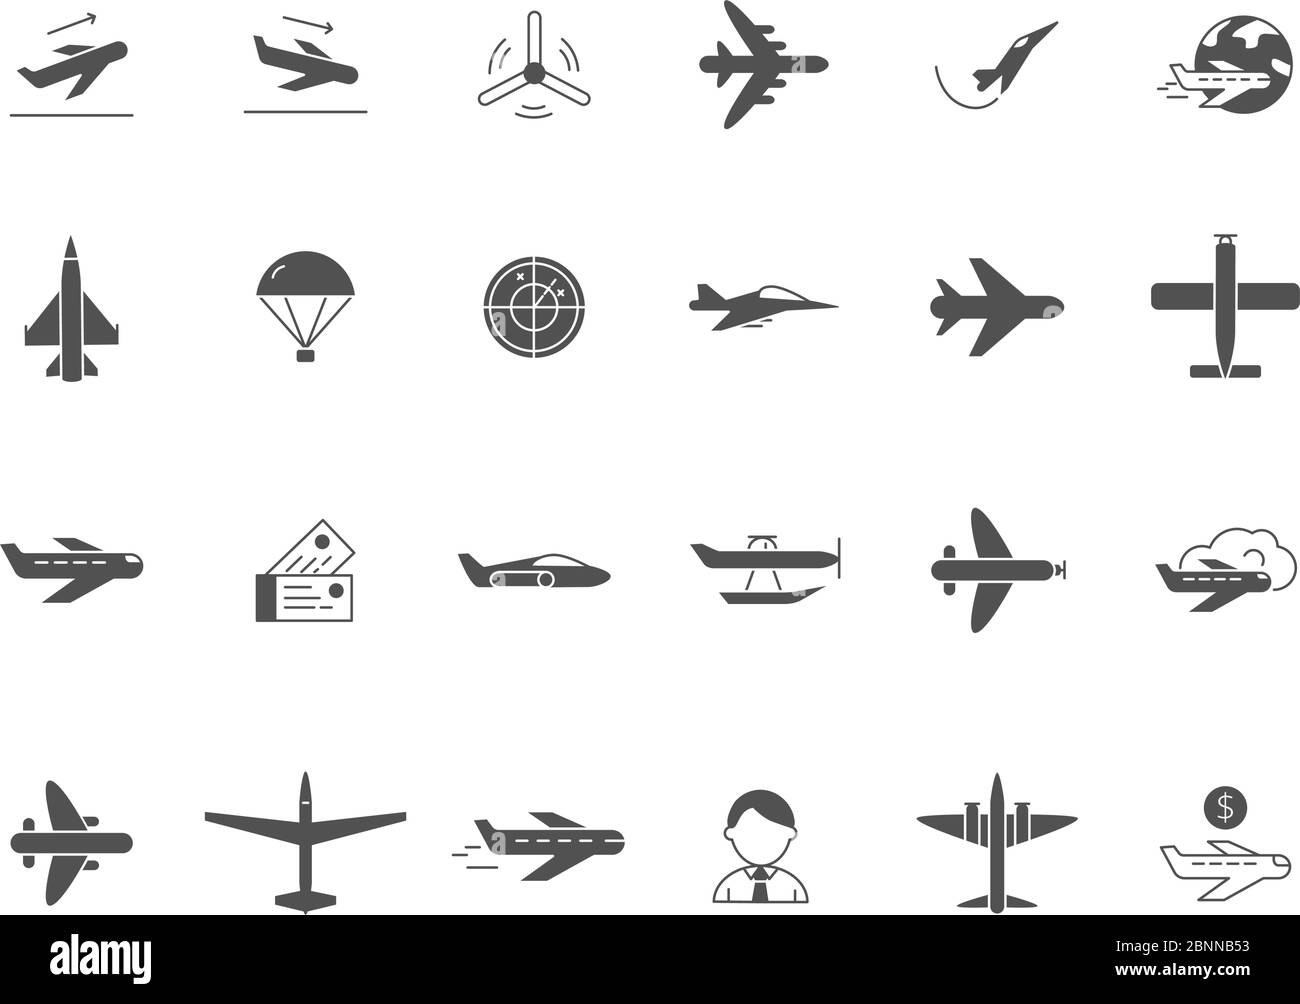 Airplane black icons. Jet aircraft military forces and civil aviation travel vector symbols Stock Vector